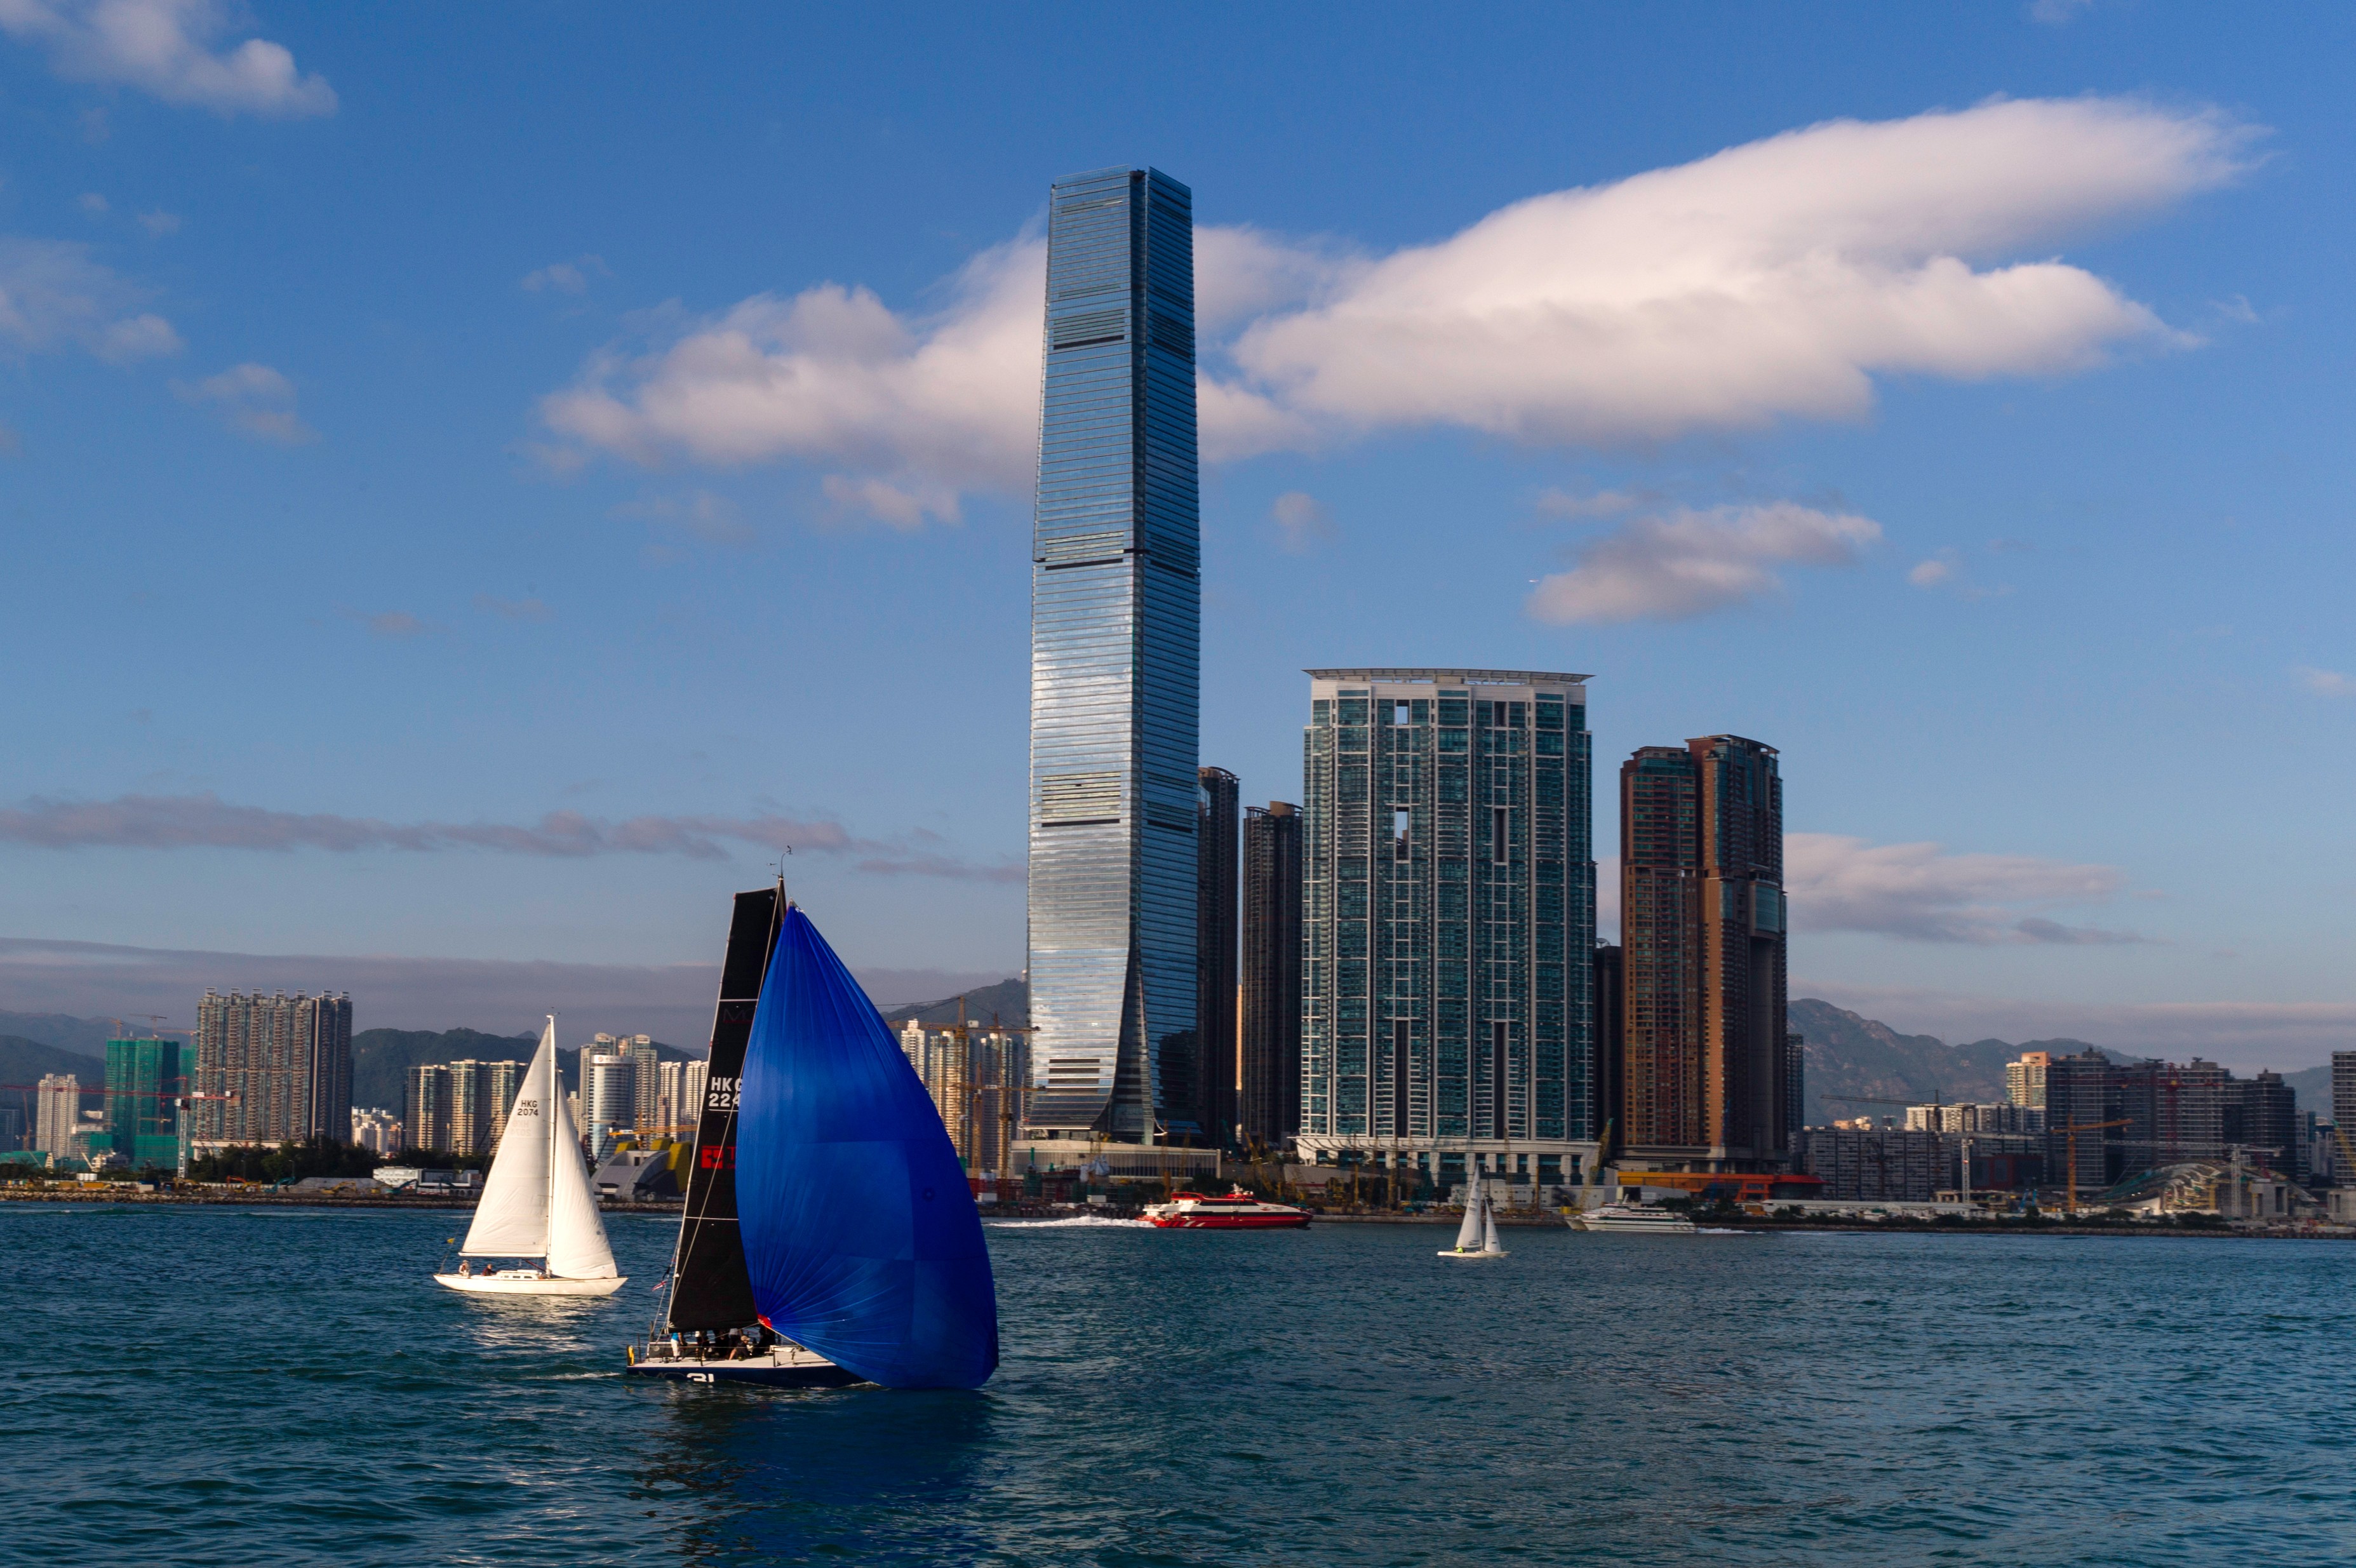 The ICC building as seen from the waters of Victoria Harbour. Photo: AFP